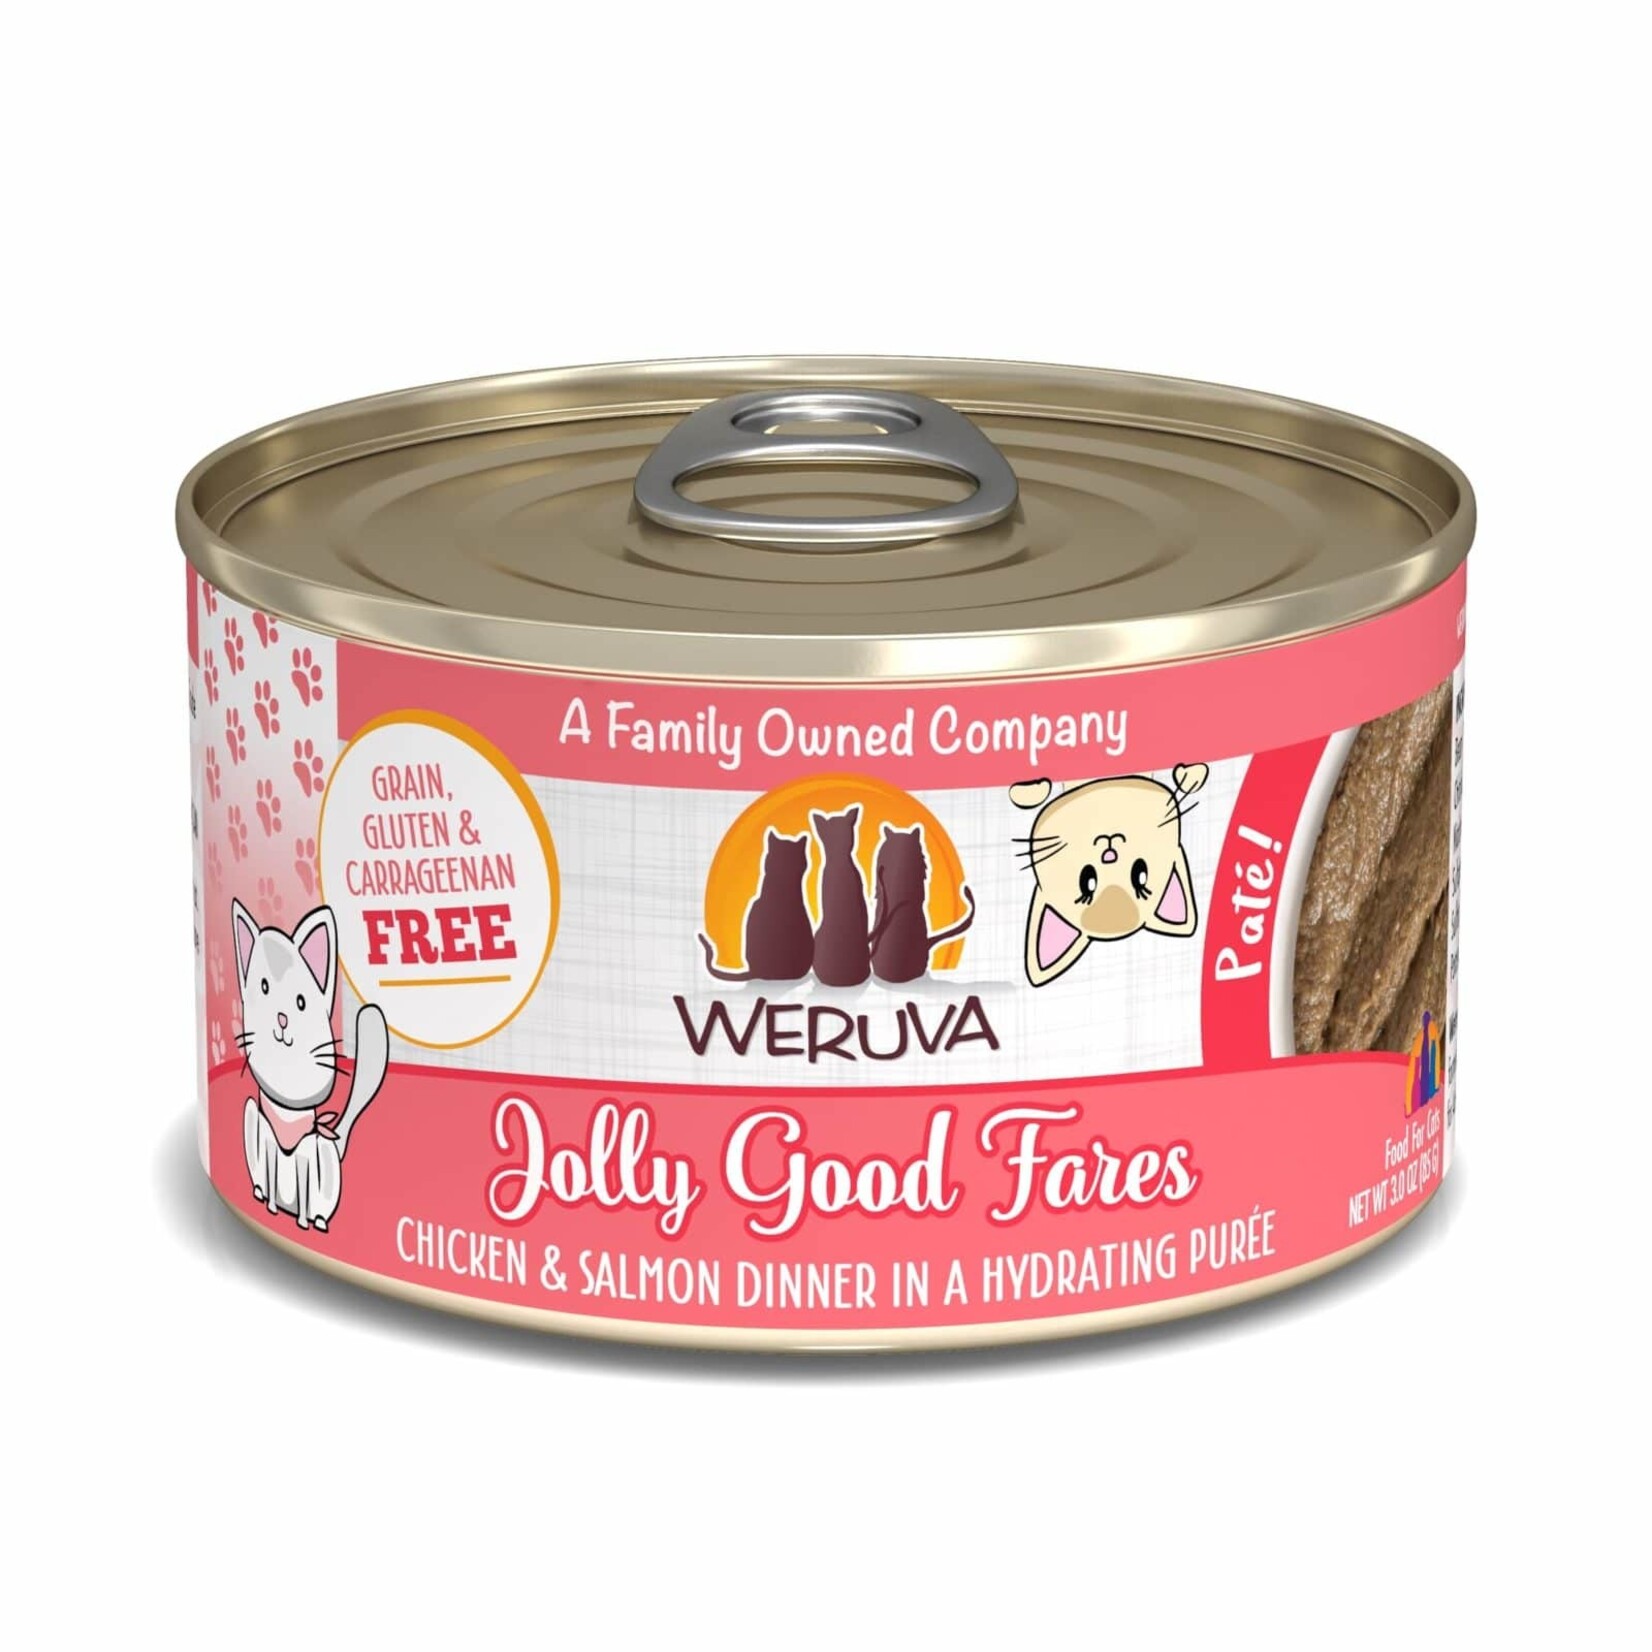 Weruva Jolly Good Fares Chicken & Salmon Dinner in a Hydrating Purée Wet Cat Food